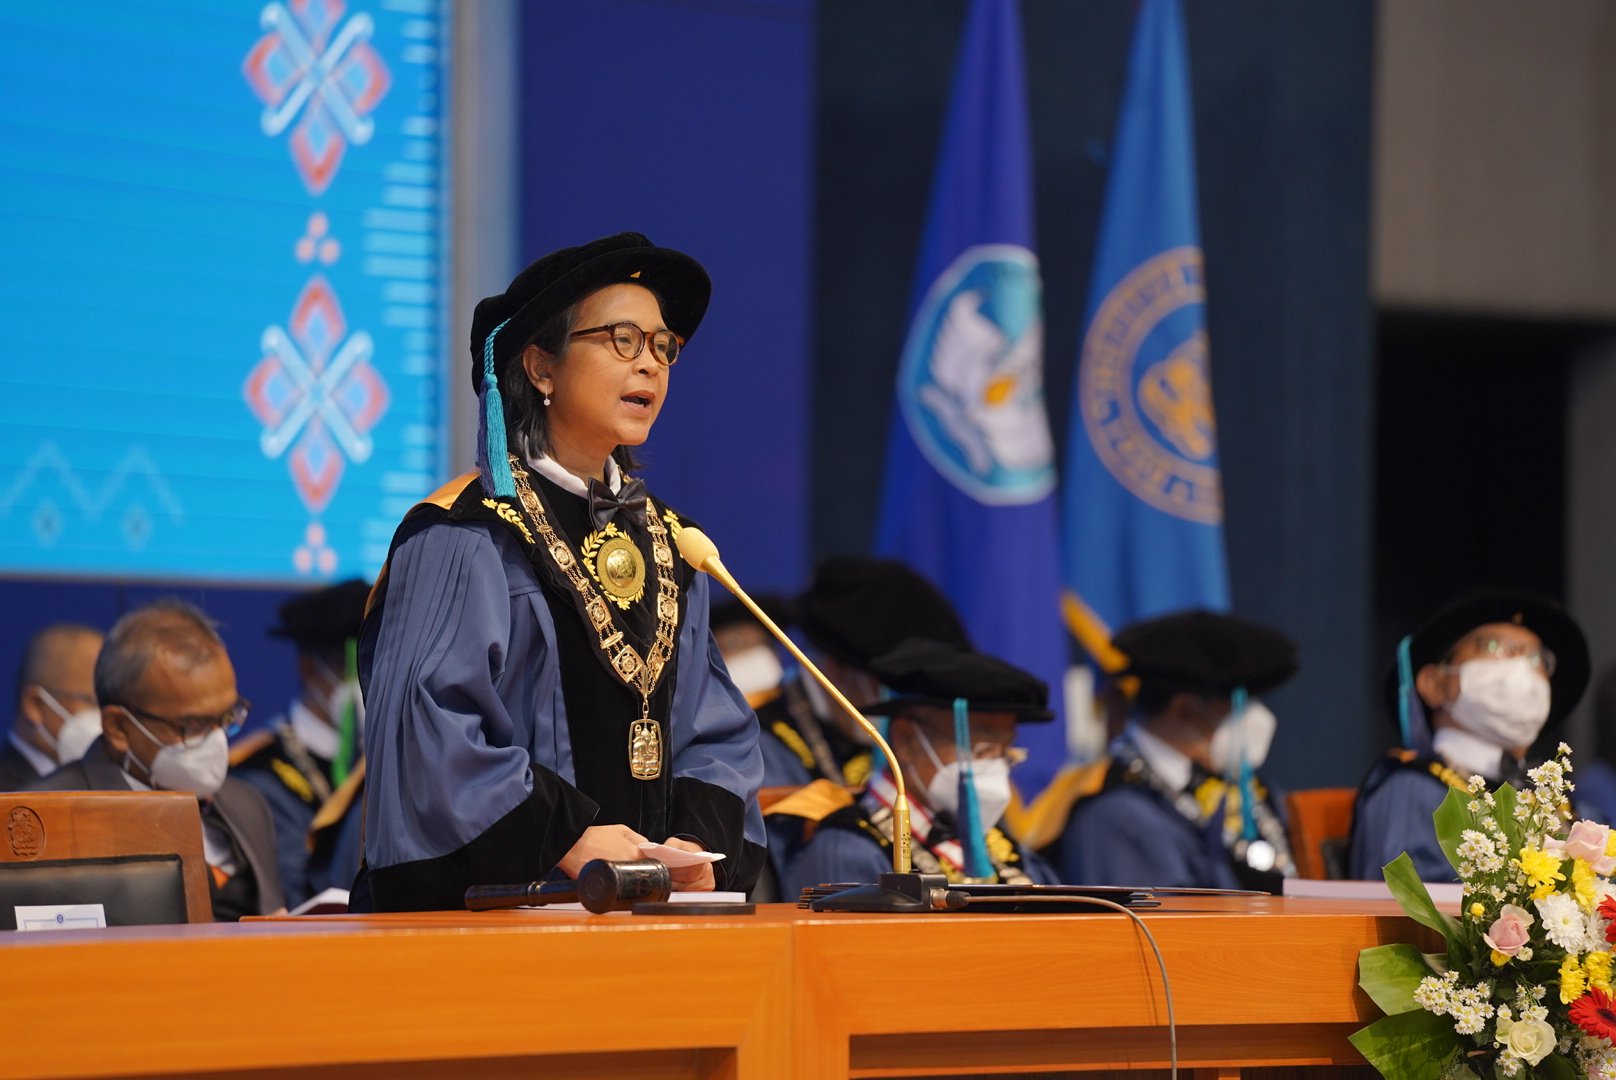 rectors-message-at-july-2022-graduation-be-a-lifelong-learner-and-think-out-of-the-box